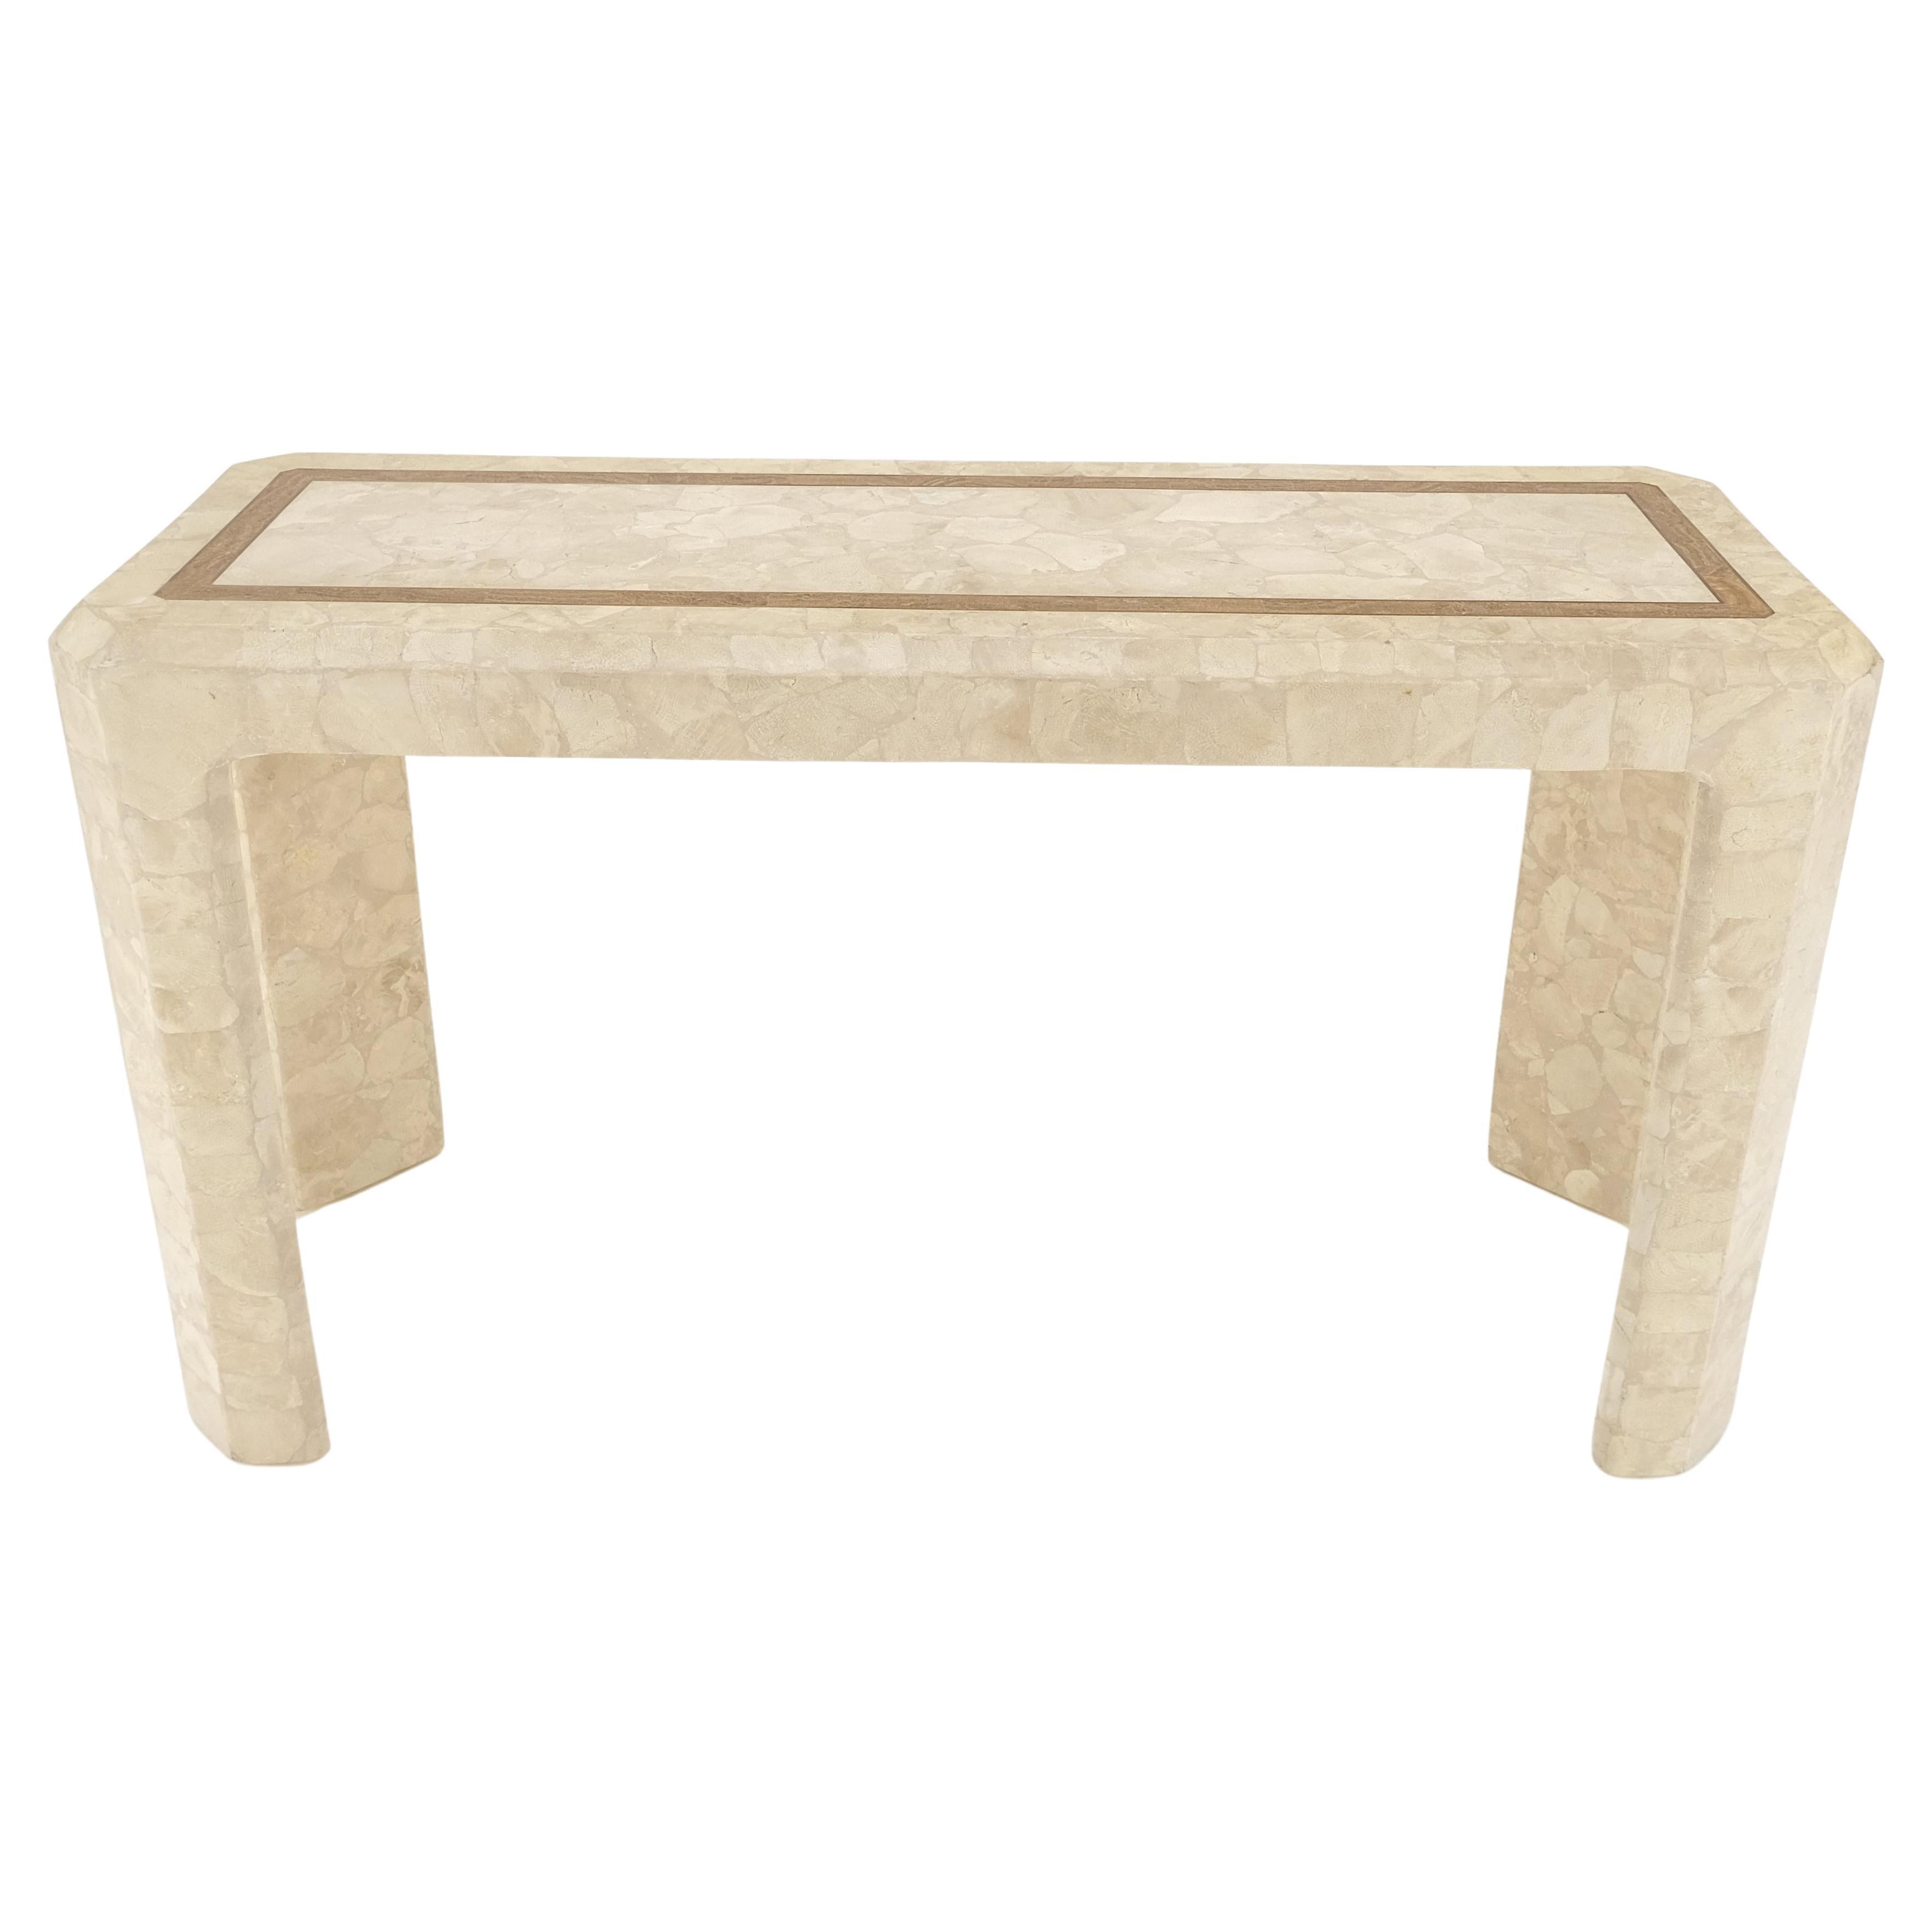 Tessellated Travertine Inlayed Top Console Sofa Table Mid Century Modern MINT! For Sale